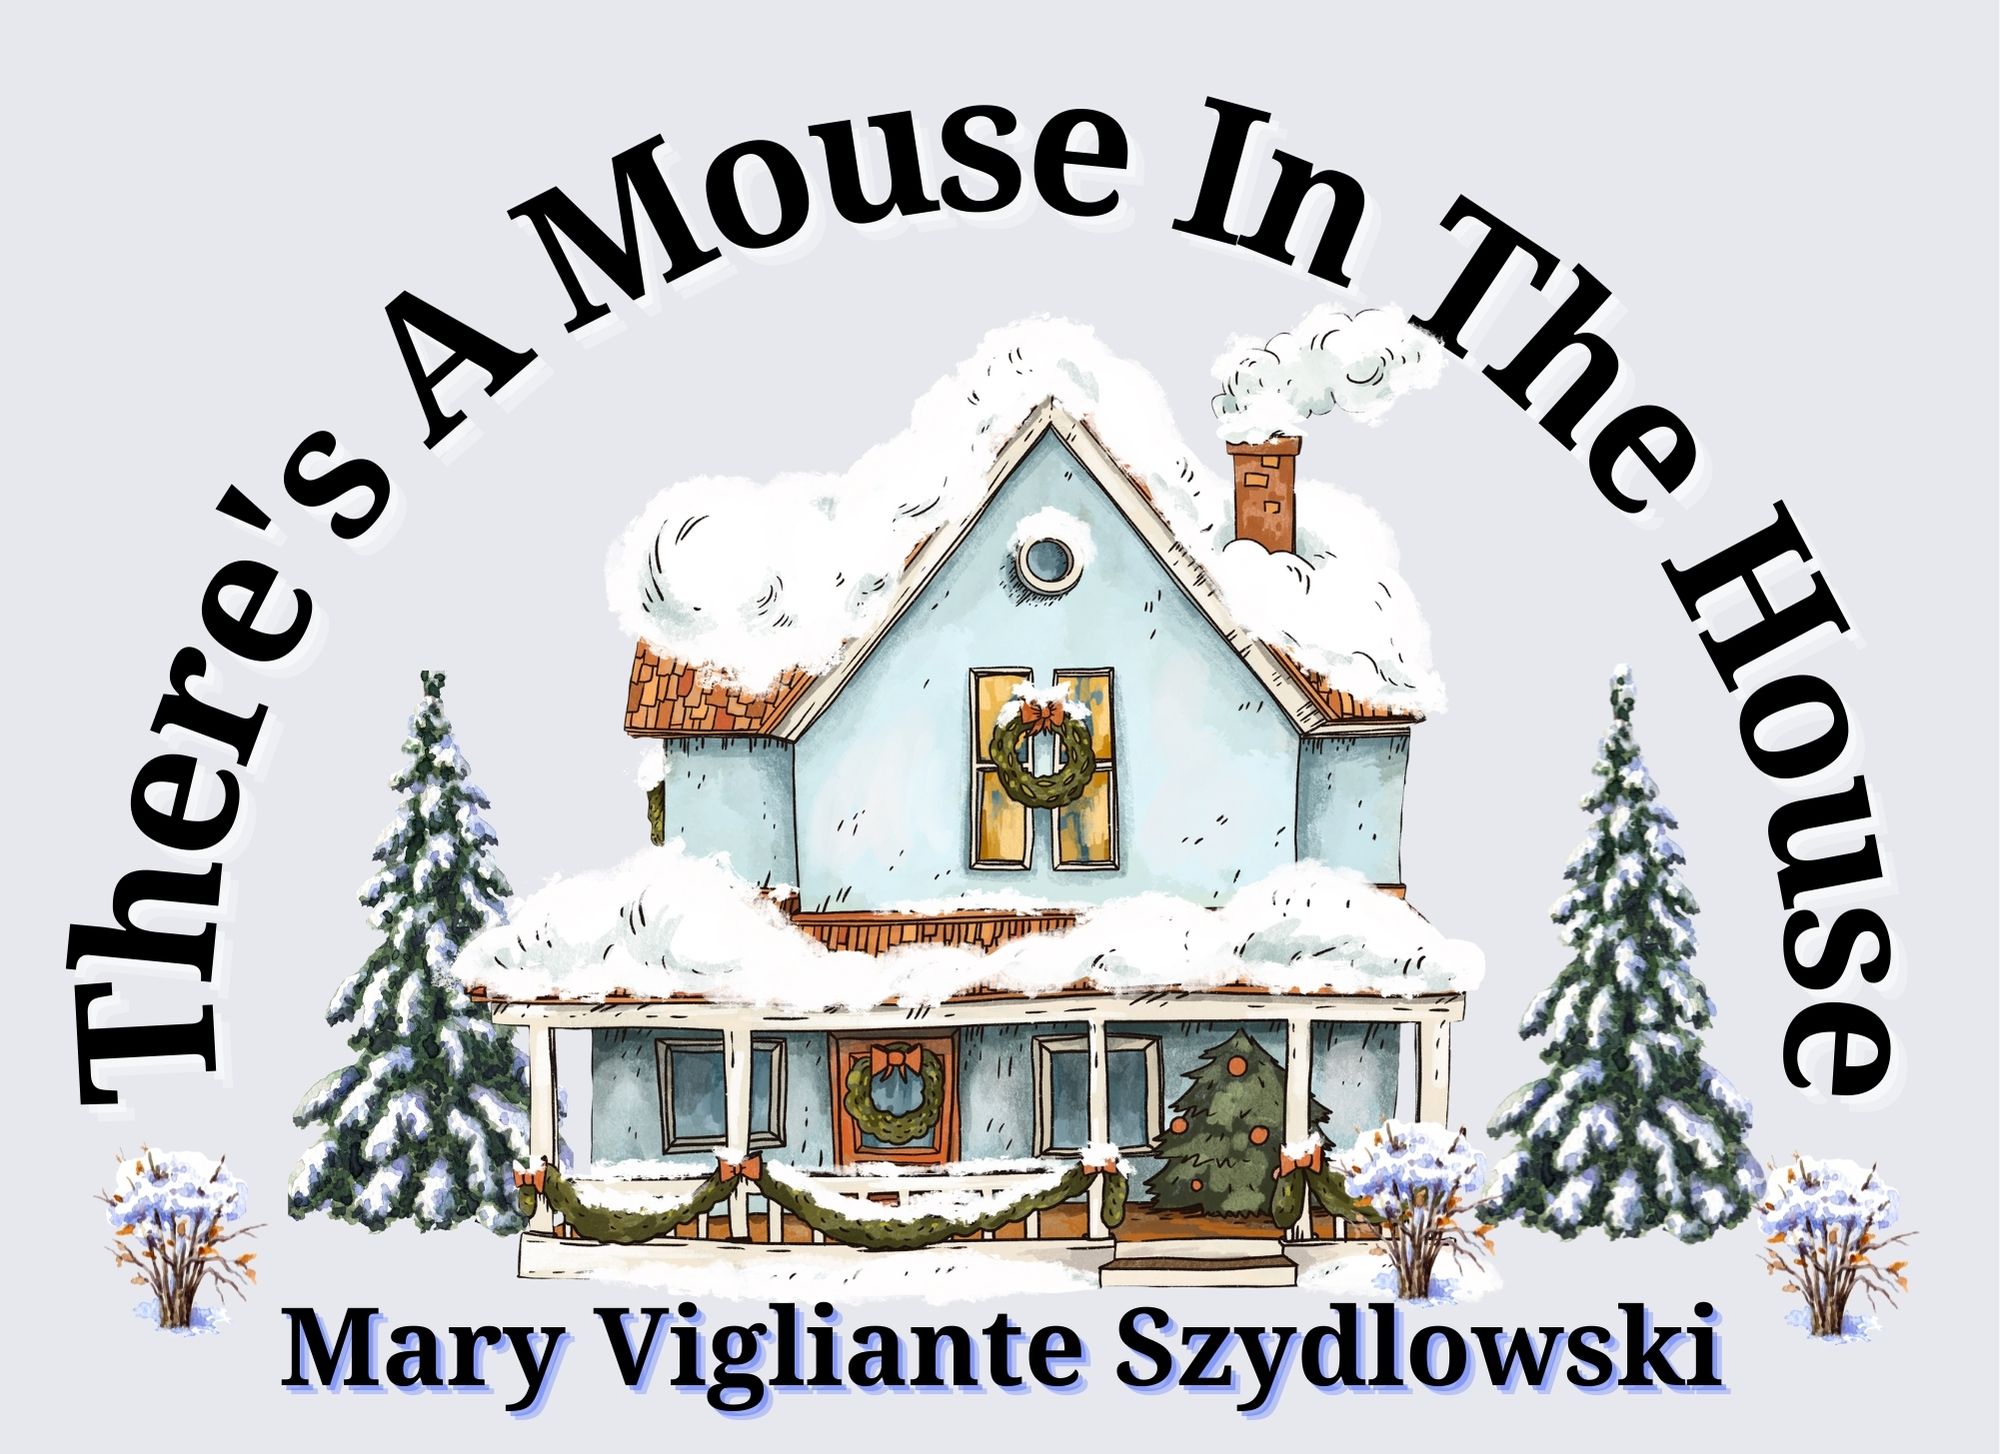 <center><b><font size="4">There's A Mouse In The House! </font></b></center>